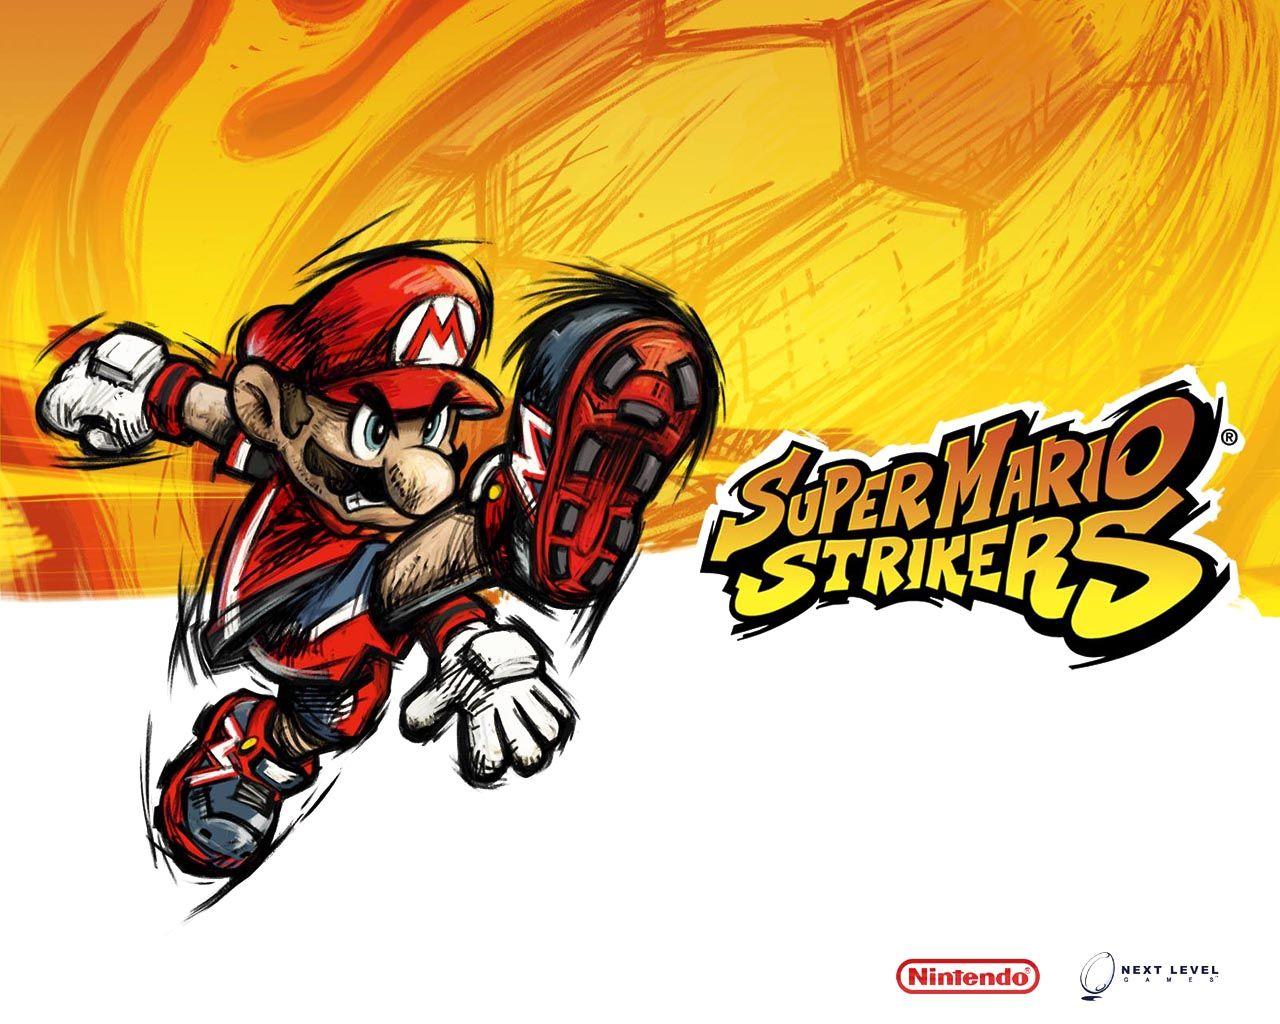 The Old Reality: Super Mario Strikers